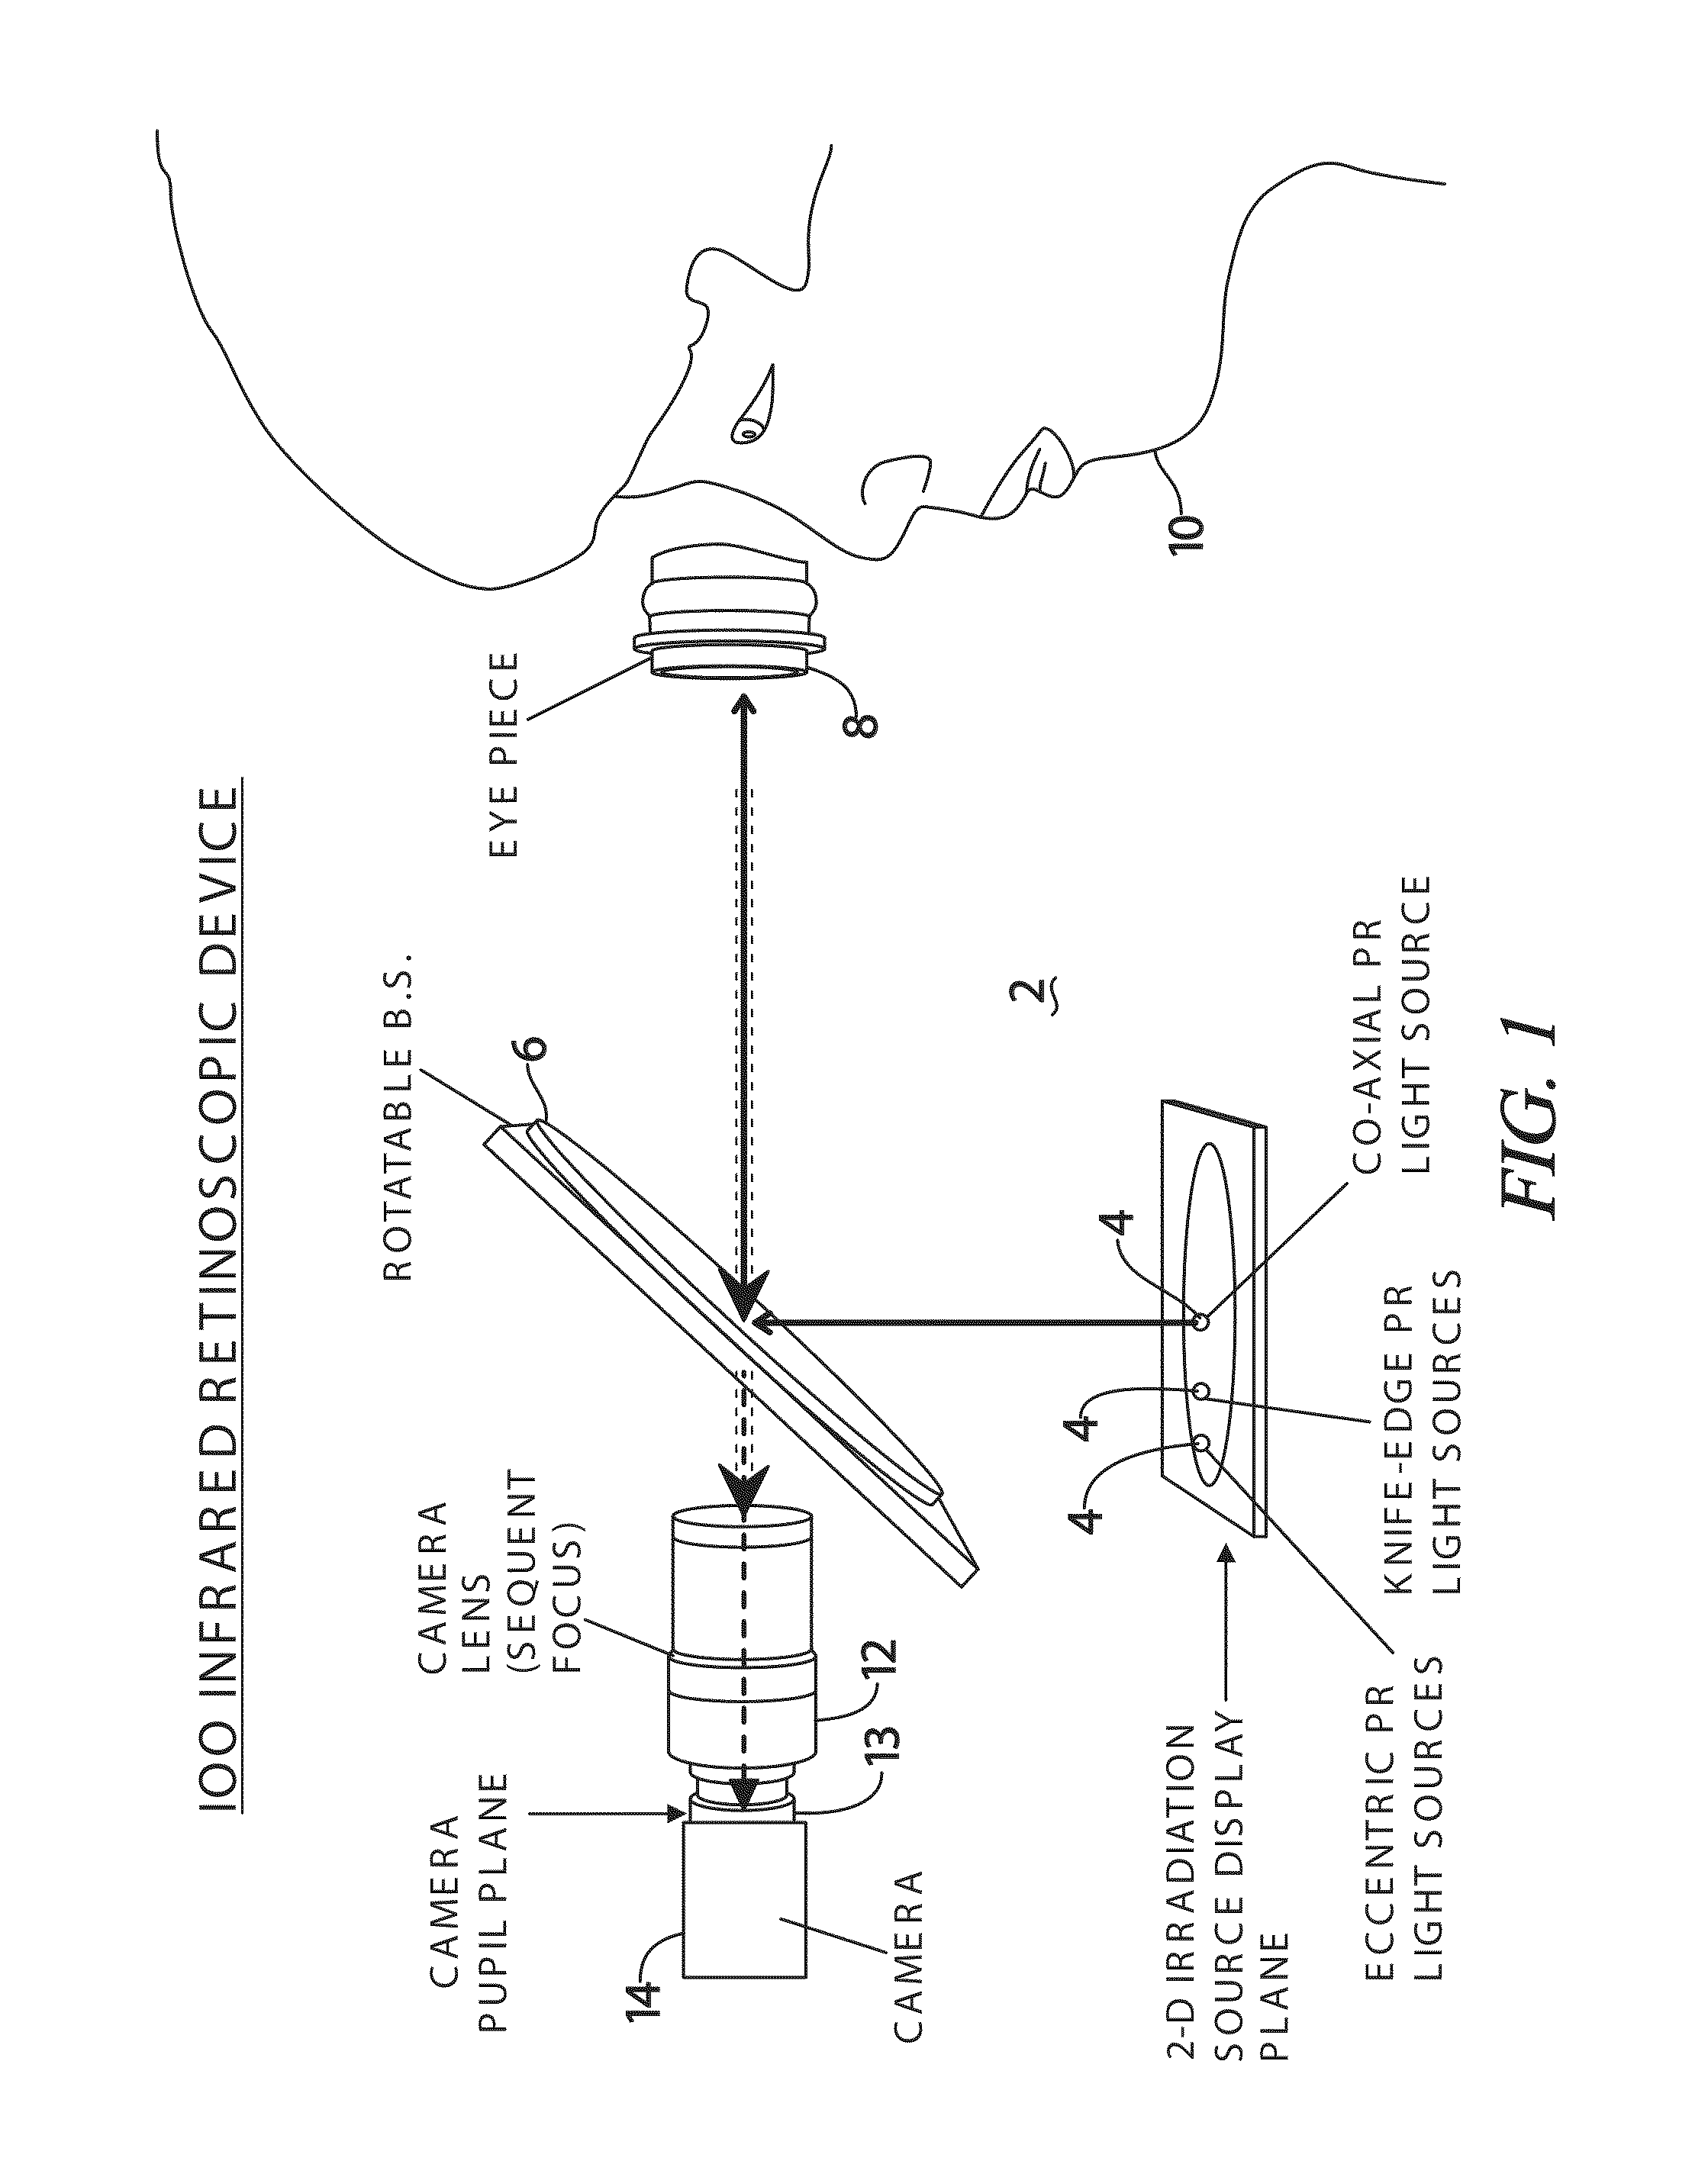 Adaptive infrared retinoscopic device for detecting ocular aberrations